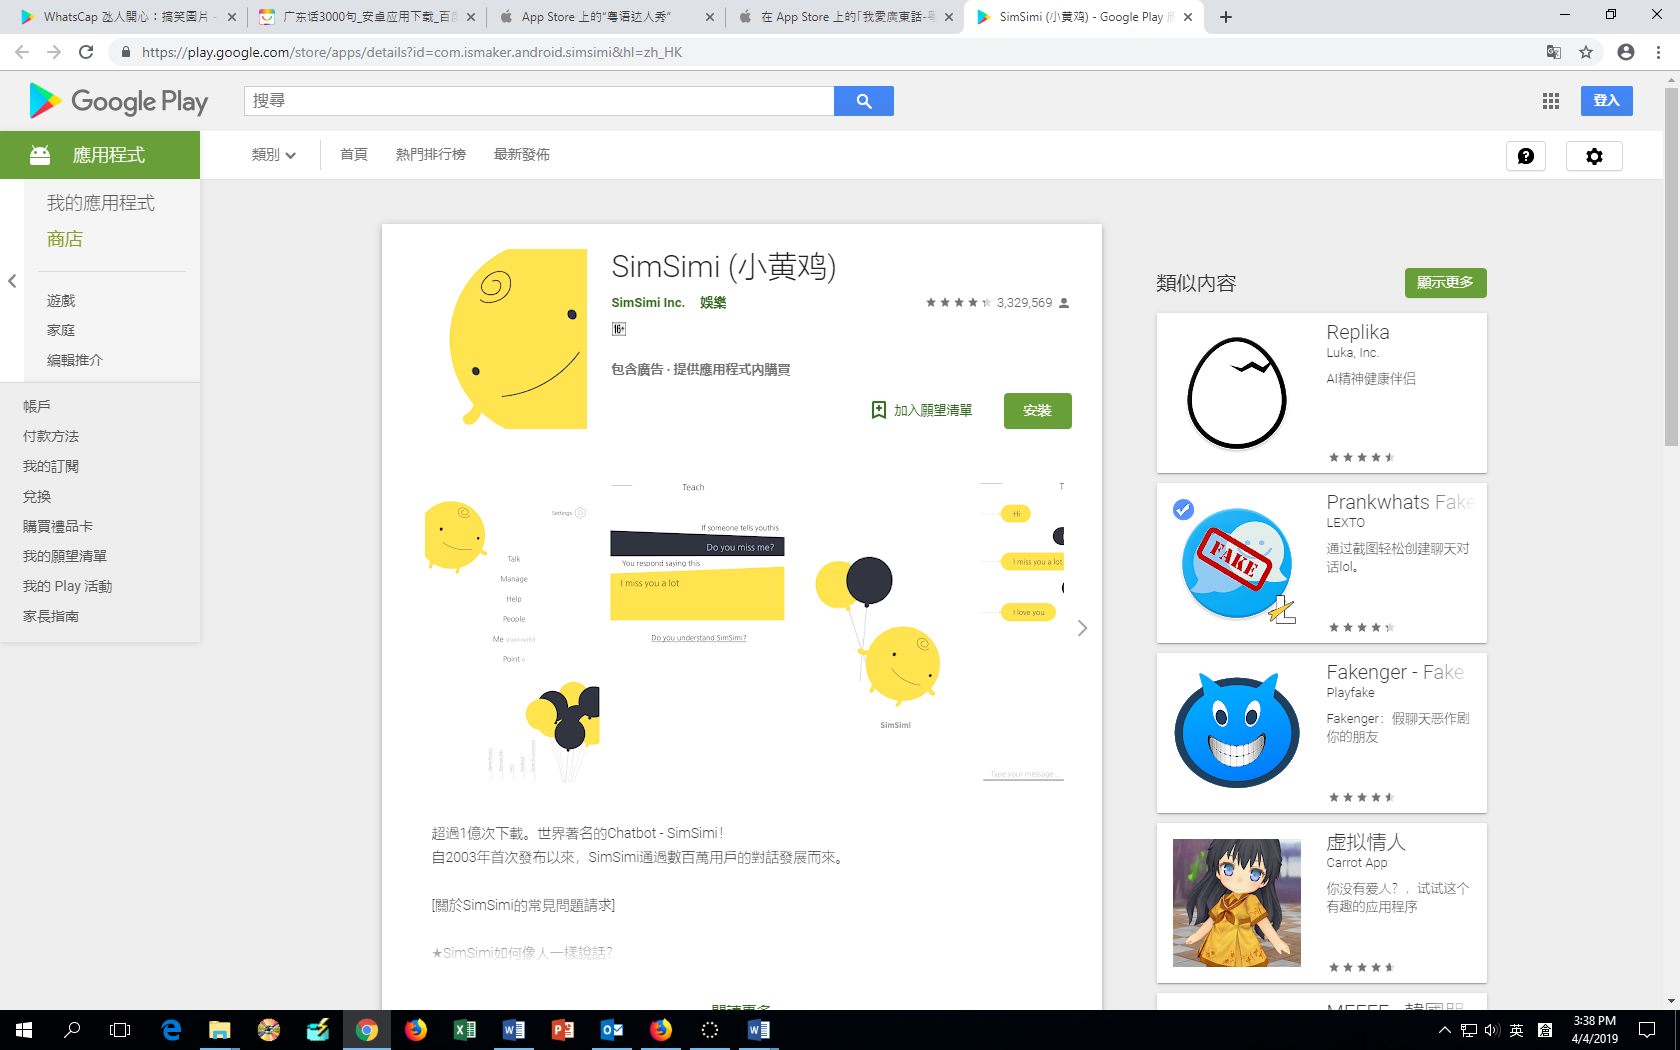 https://play.google.com/store/apps/details?id=com.ismaker.android.simsimi&hl=zh_HK